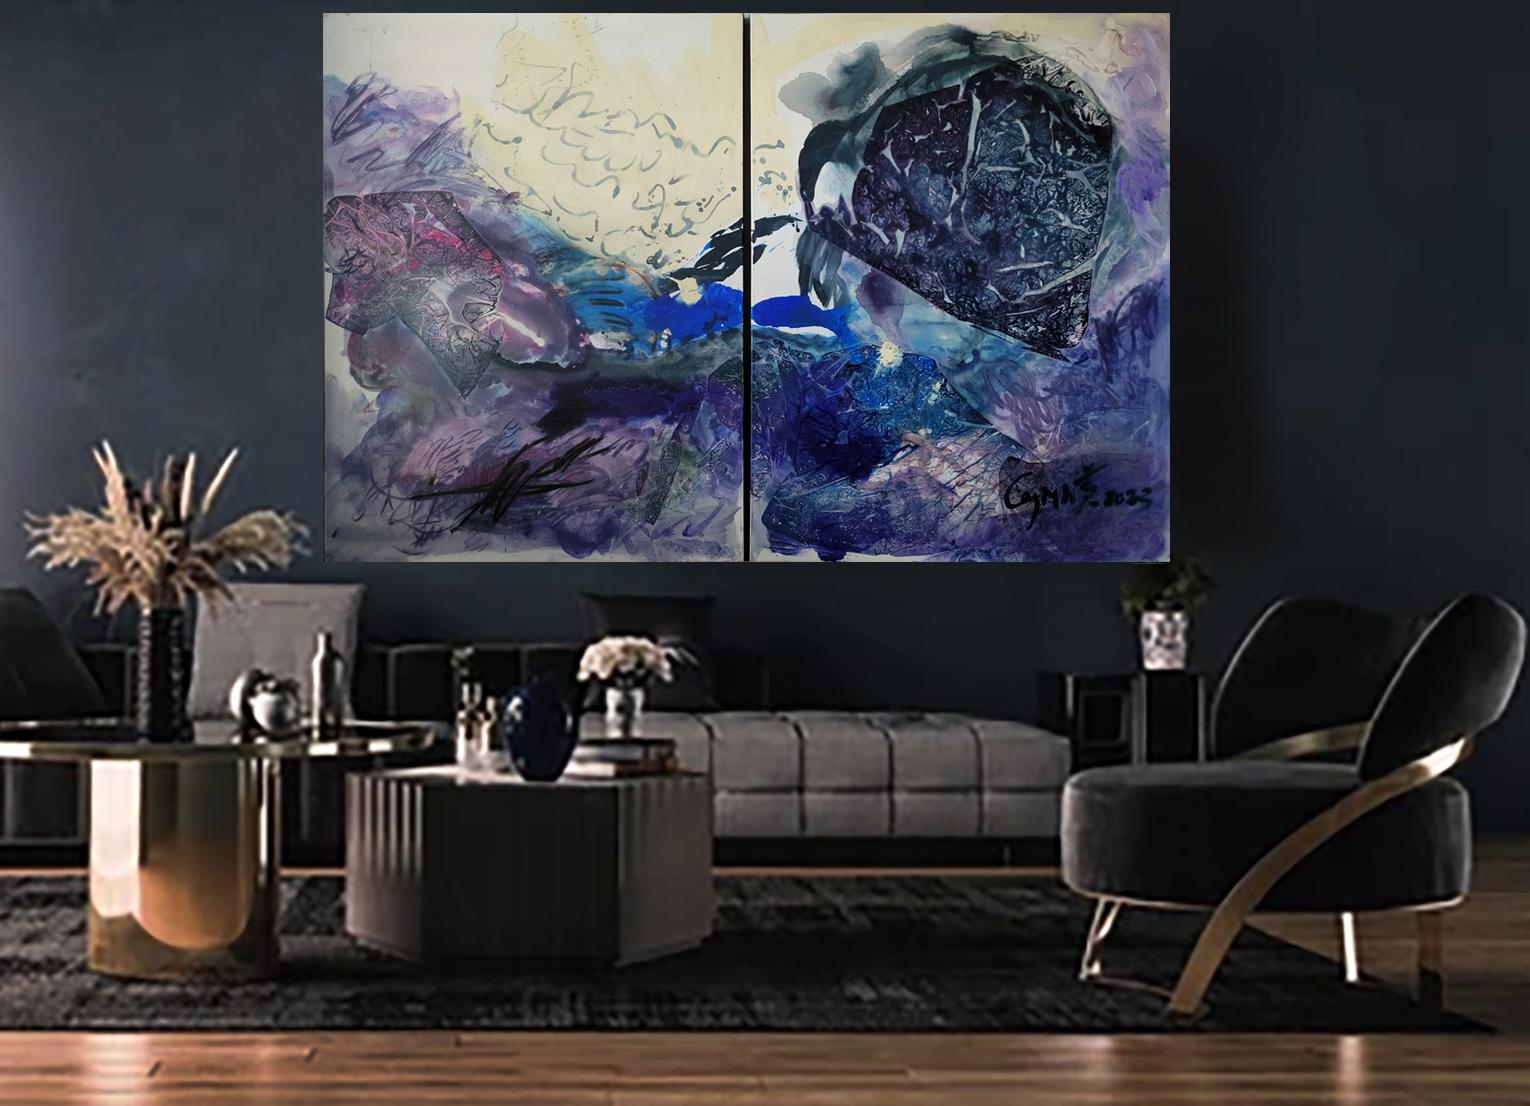 The Alchemy of Solitary Growth- Energetic, Expressive Abstract, Zen Calligraphy - Abstract Expressionist Painting by Cymn Wong 